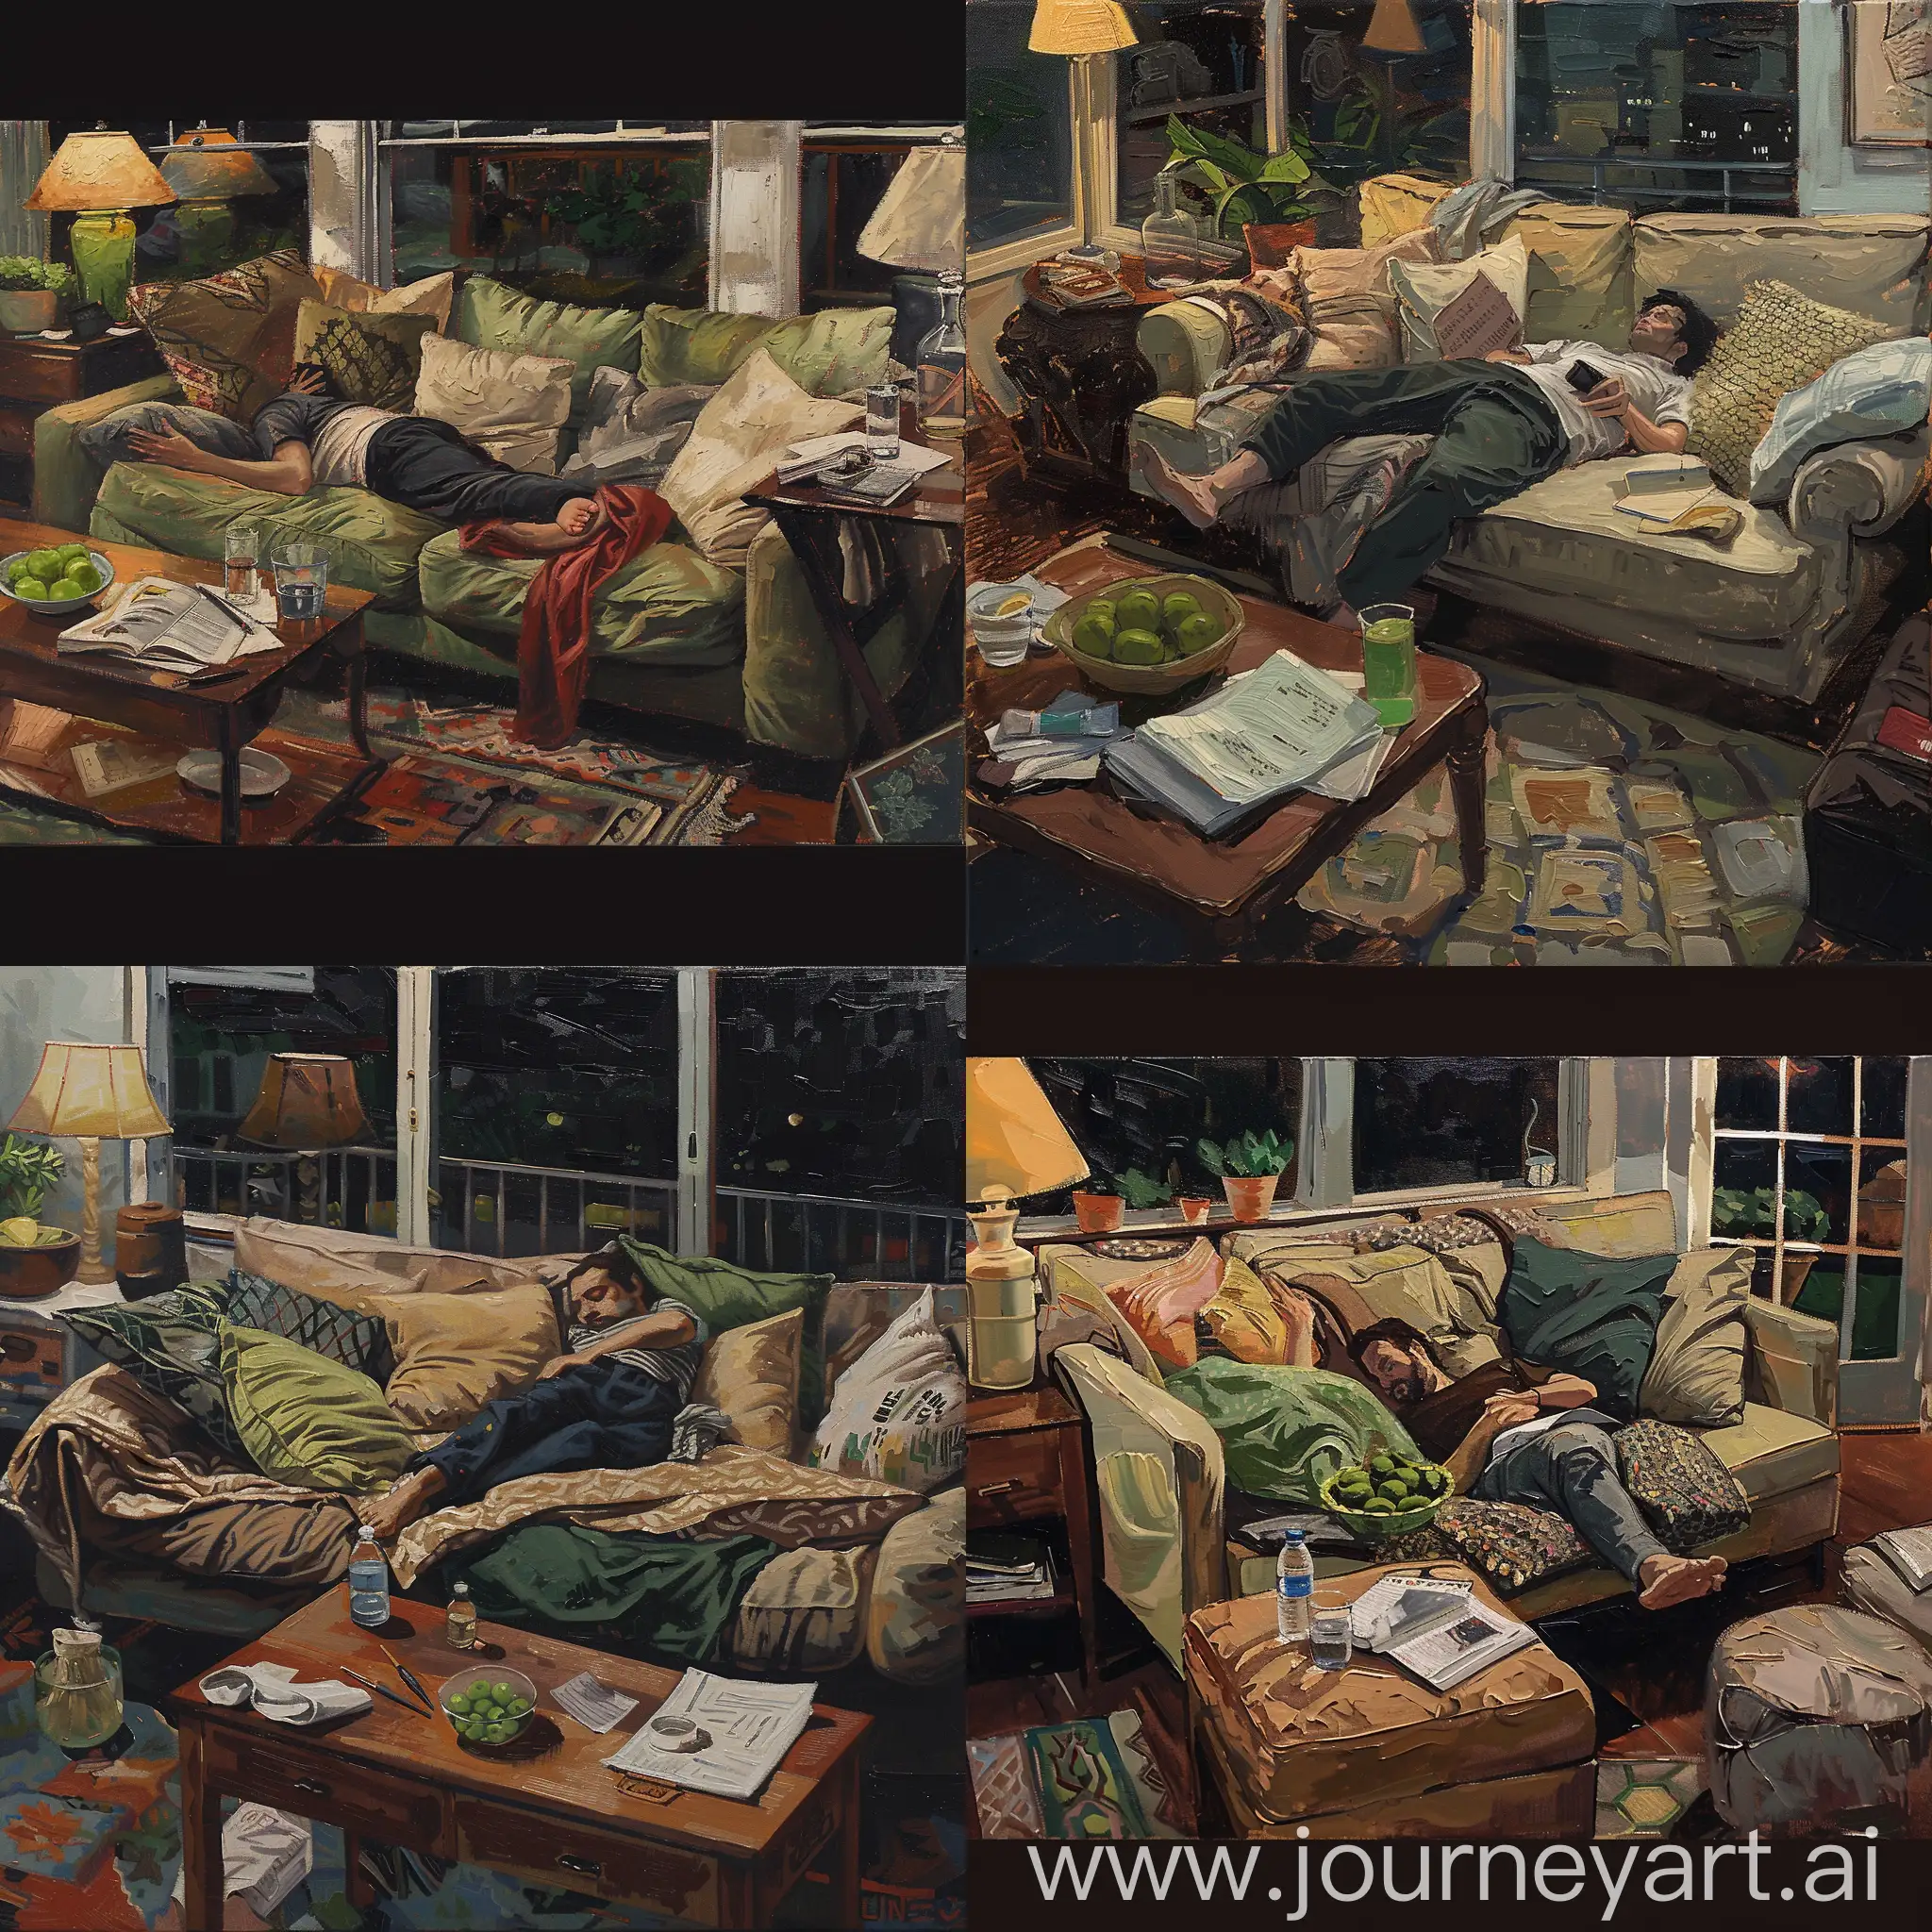 textured oil painting of an indoor scene, a person lying on the couch, The scene should include a cozy room with various pillows and a blanket on the couch, a window showing an outdoor view, a side table with a glass of water, a bottle, and papers or a book. Add a bowl of green fruit and a potted plant for a natural touch, Use an warm earthy color palette and paint a textured painting style, scene is in nighttime --iw 2.0 --ar 16:9
